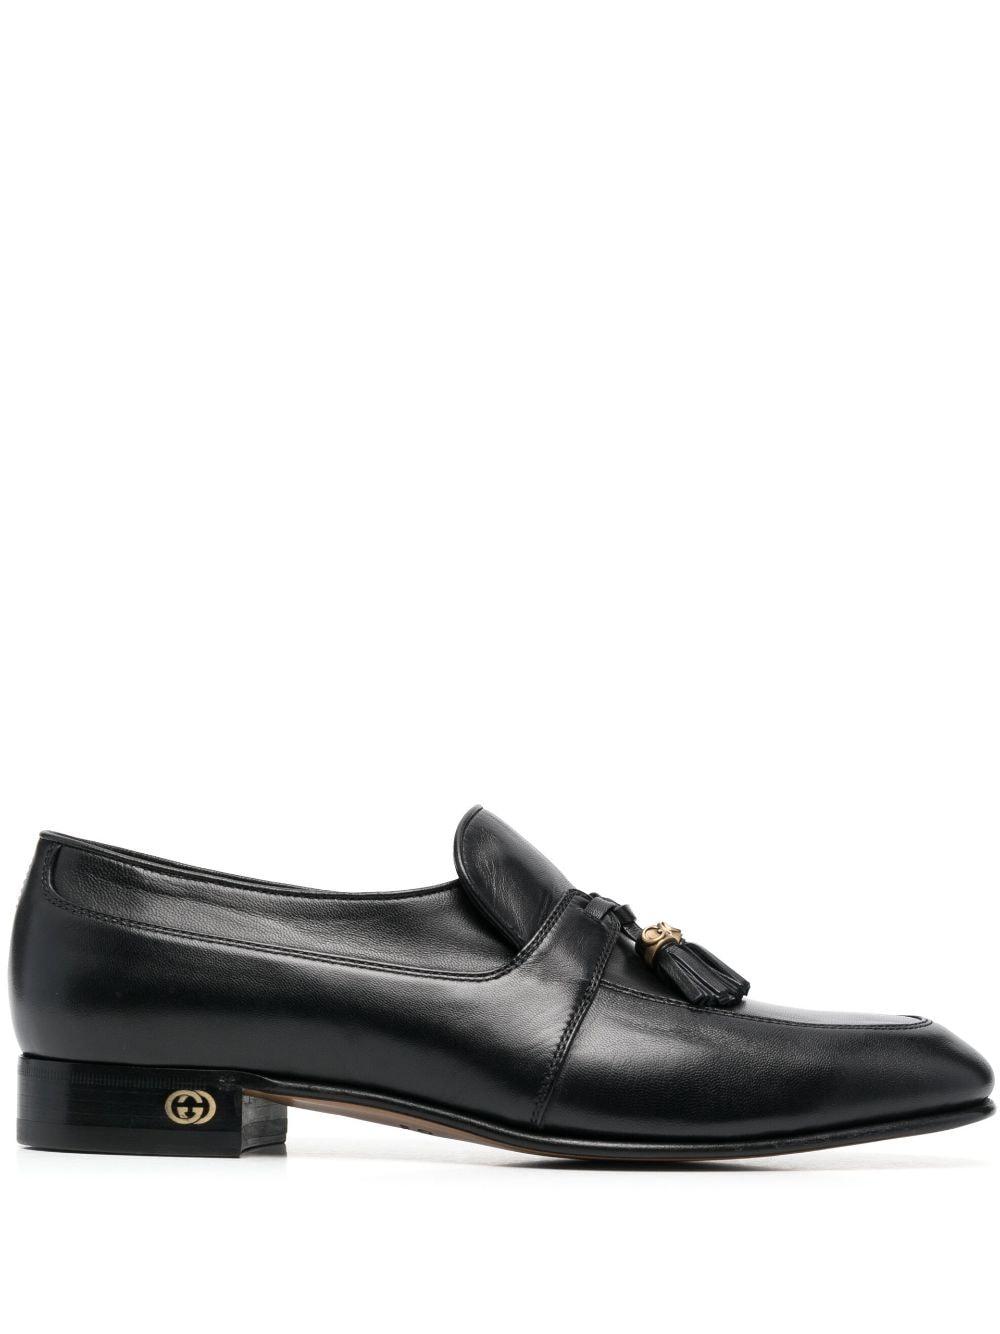 Gucci Tassel-trim Leather Loafers in Black for Men | Lyst